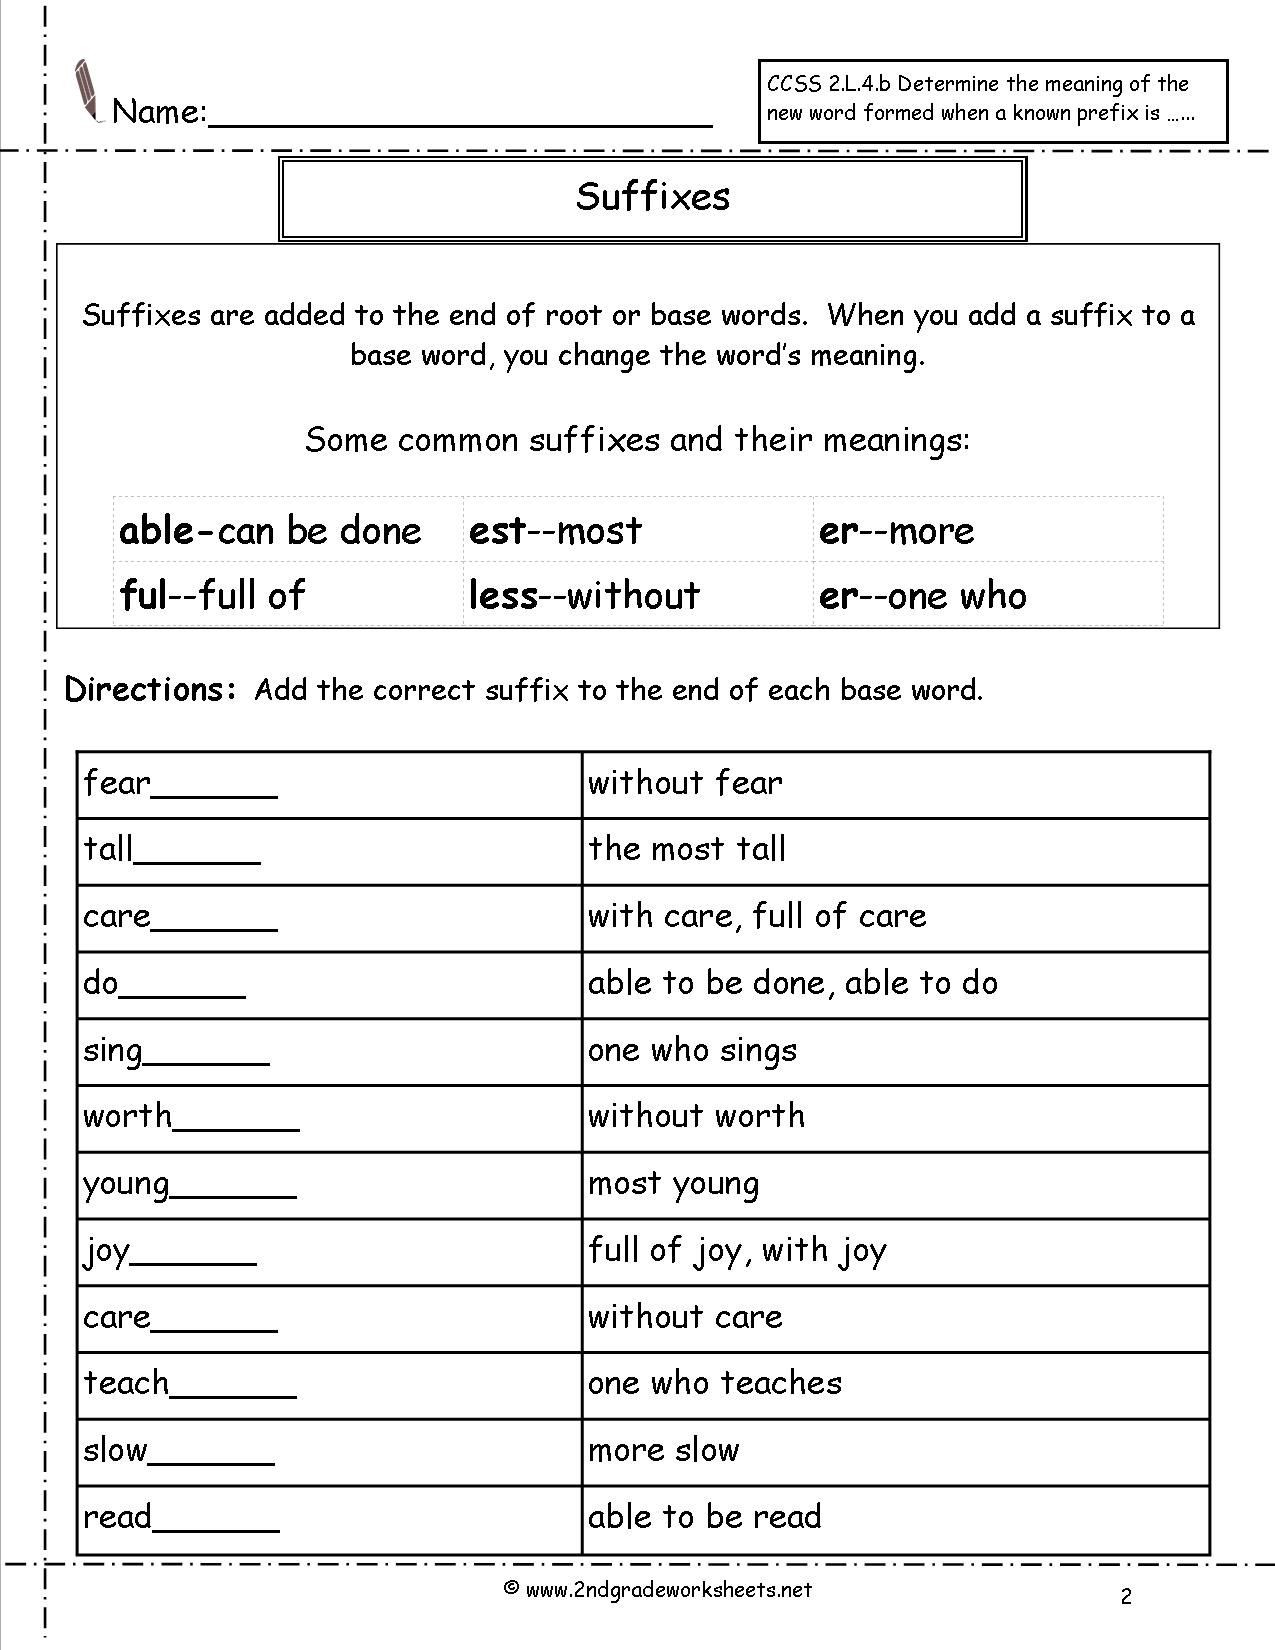 Prefix Worksheets 4th Grade 41 Innovative Prefix Worksheets for You with Images